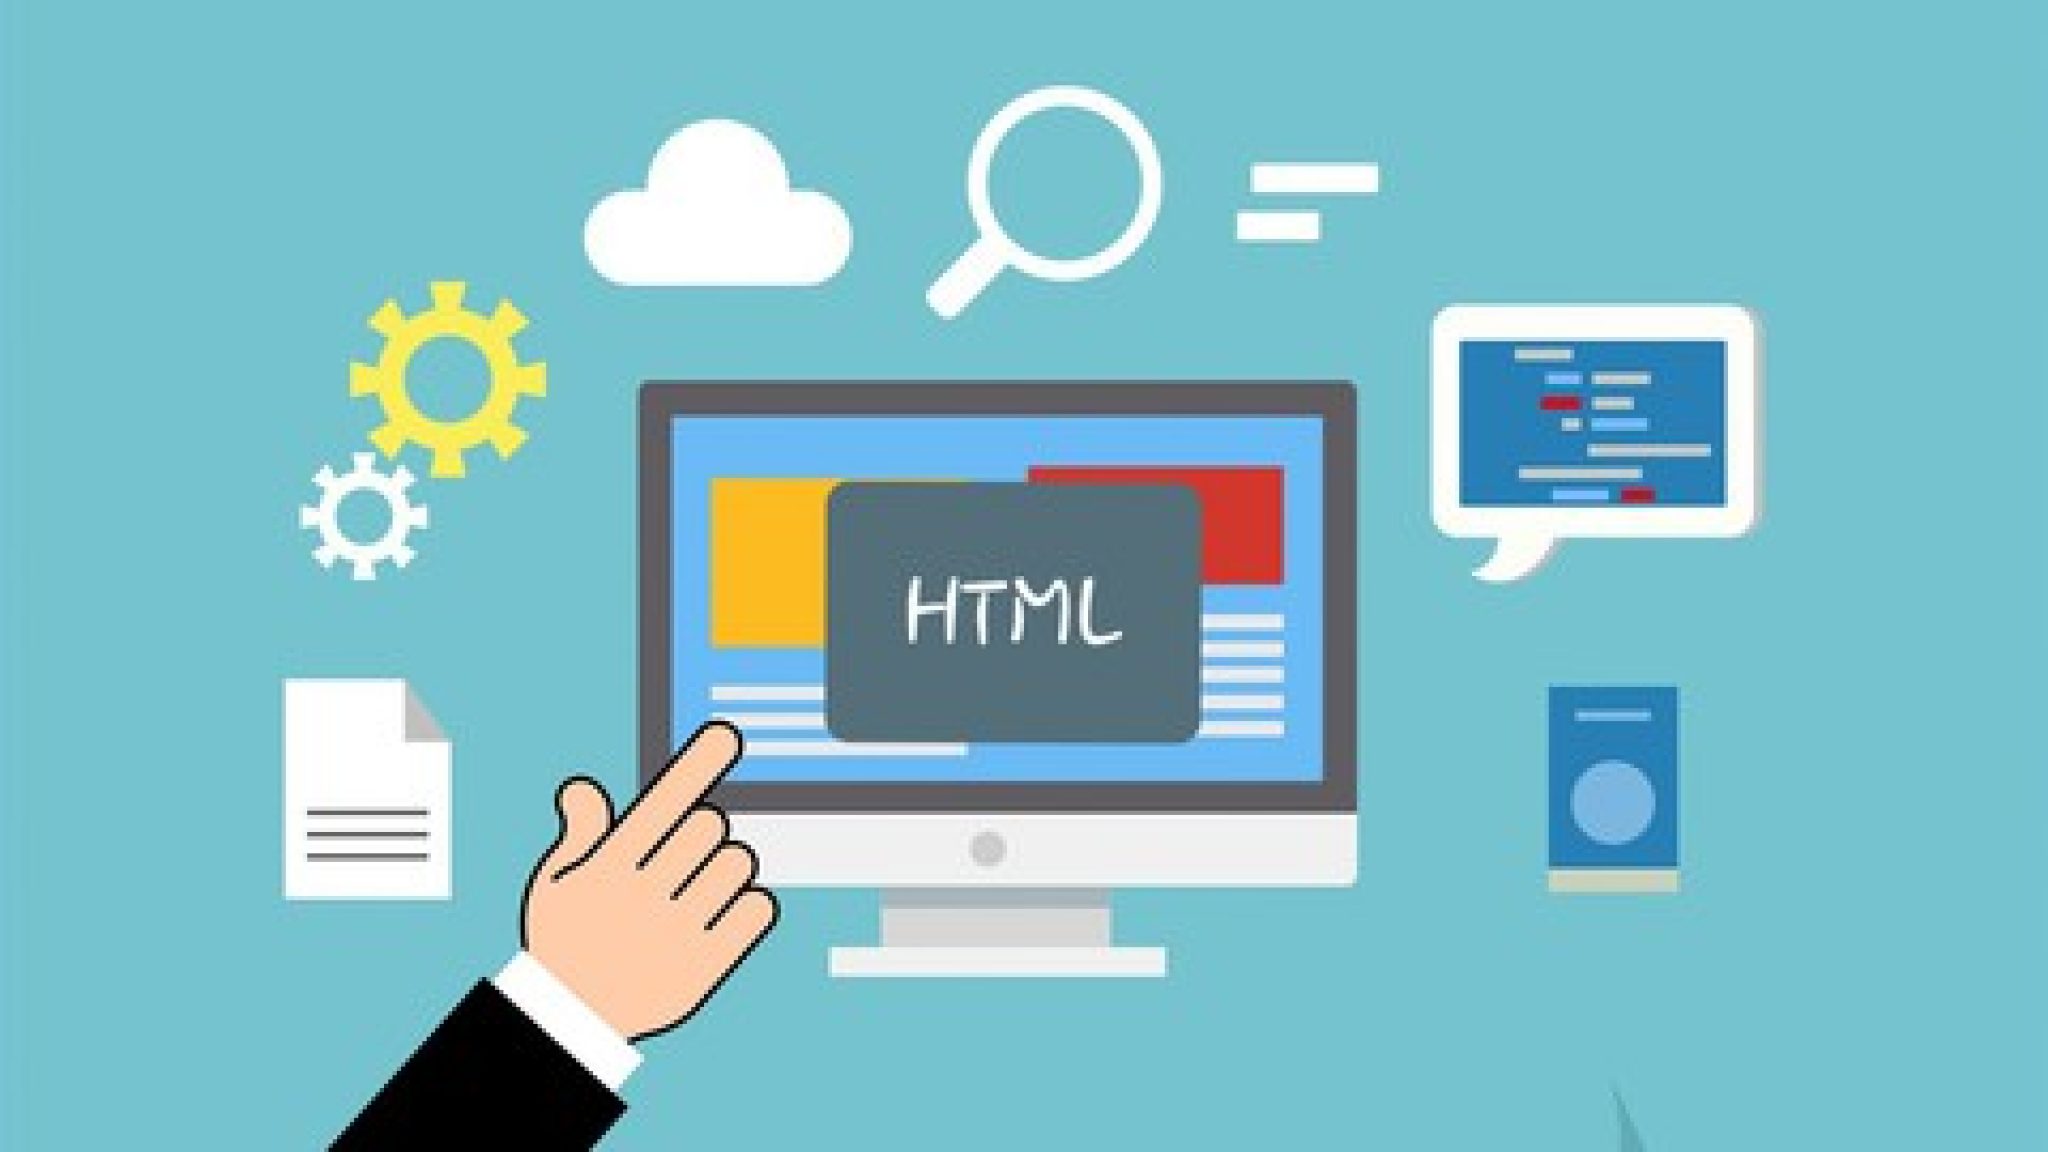 Off Learn Html Course For Beginners With Certificate Of Completion Tutorial Bar